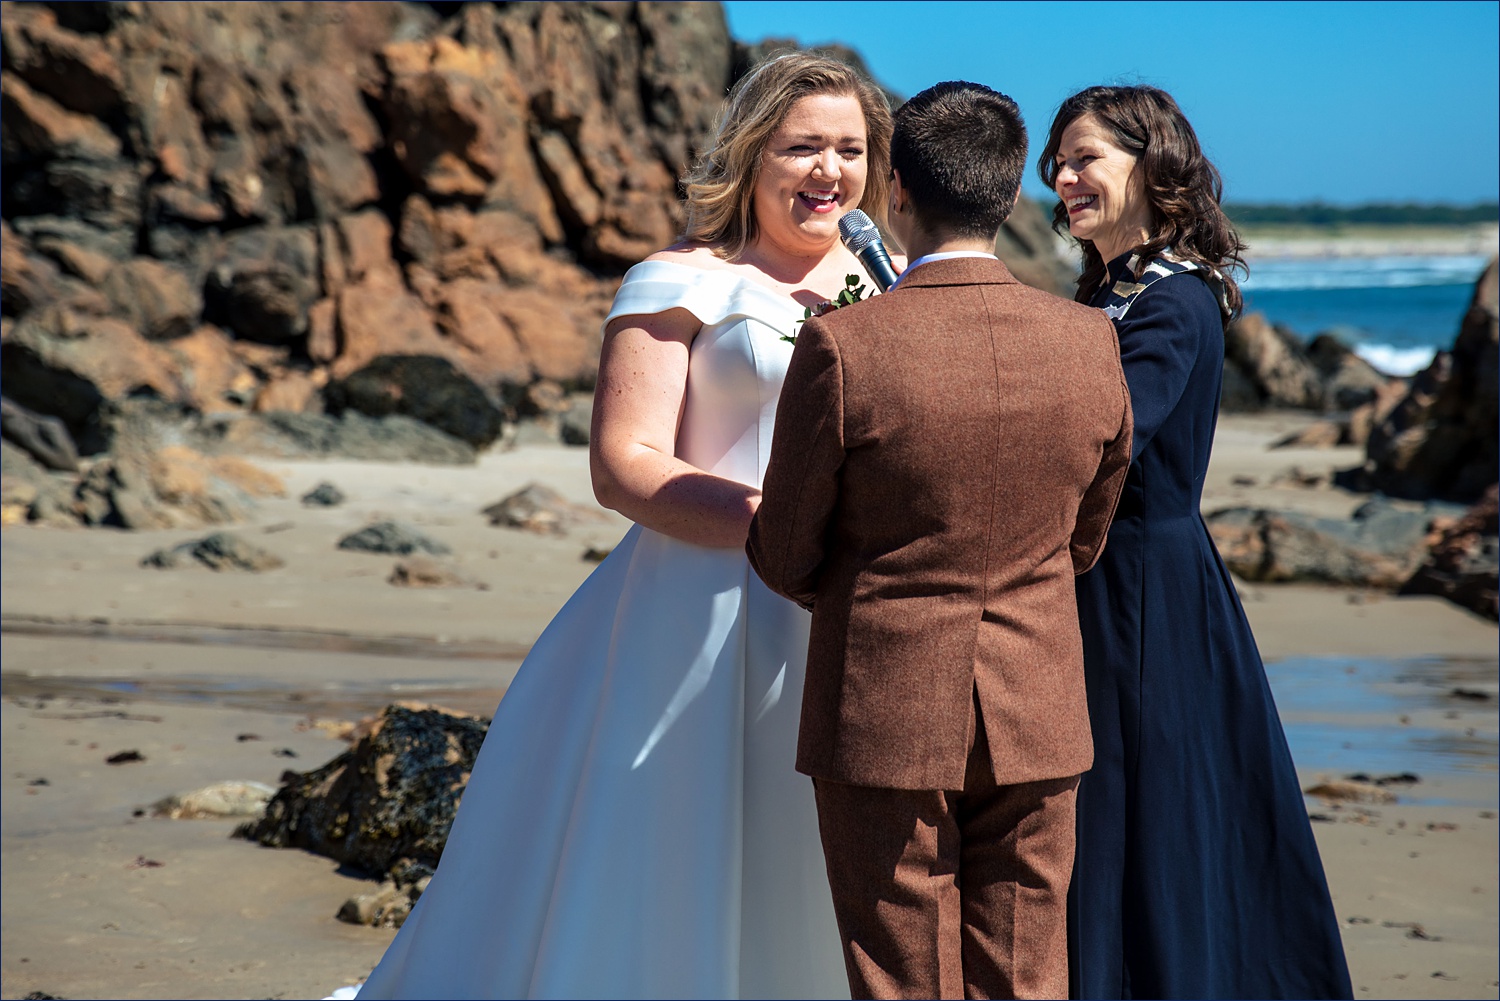 The small ceremony on the beach of Ogunquit Maine